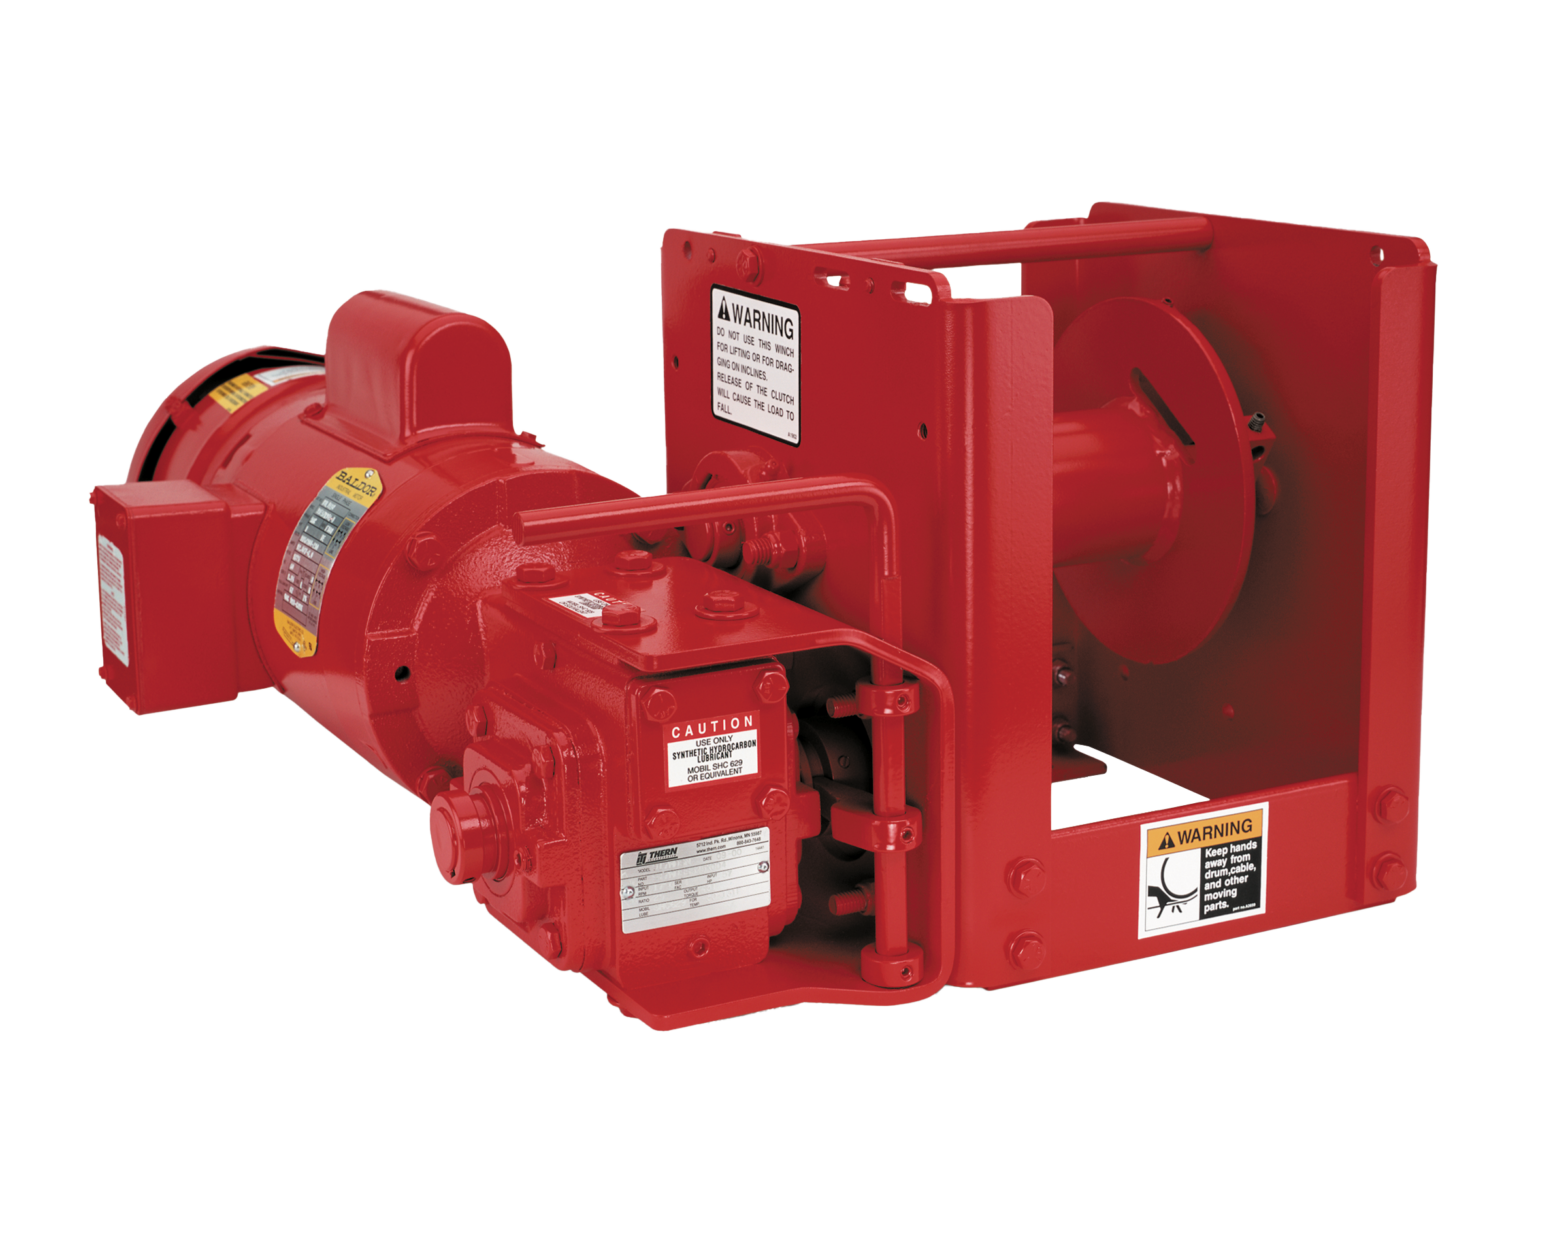 Thern Worm Spur Winch to 6,000 lbs